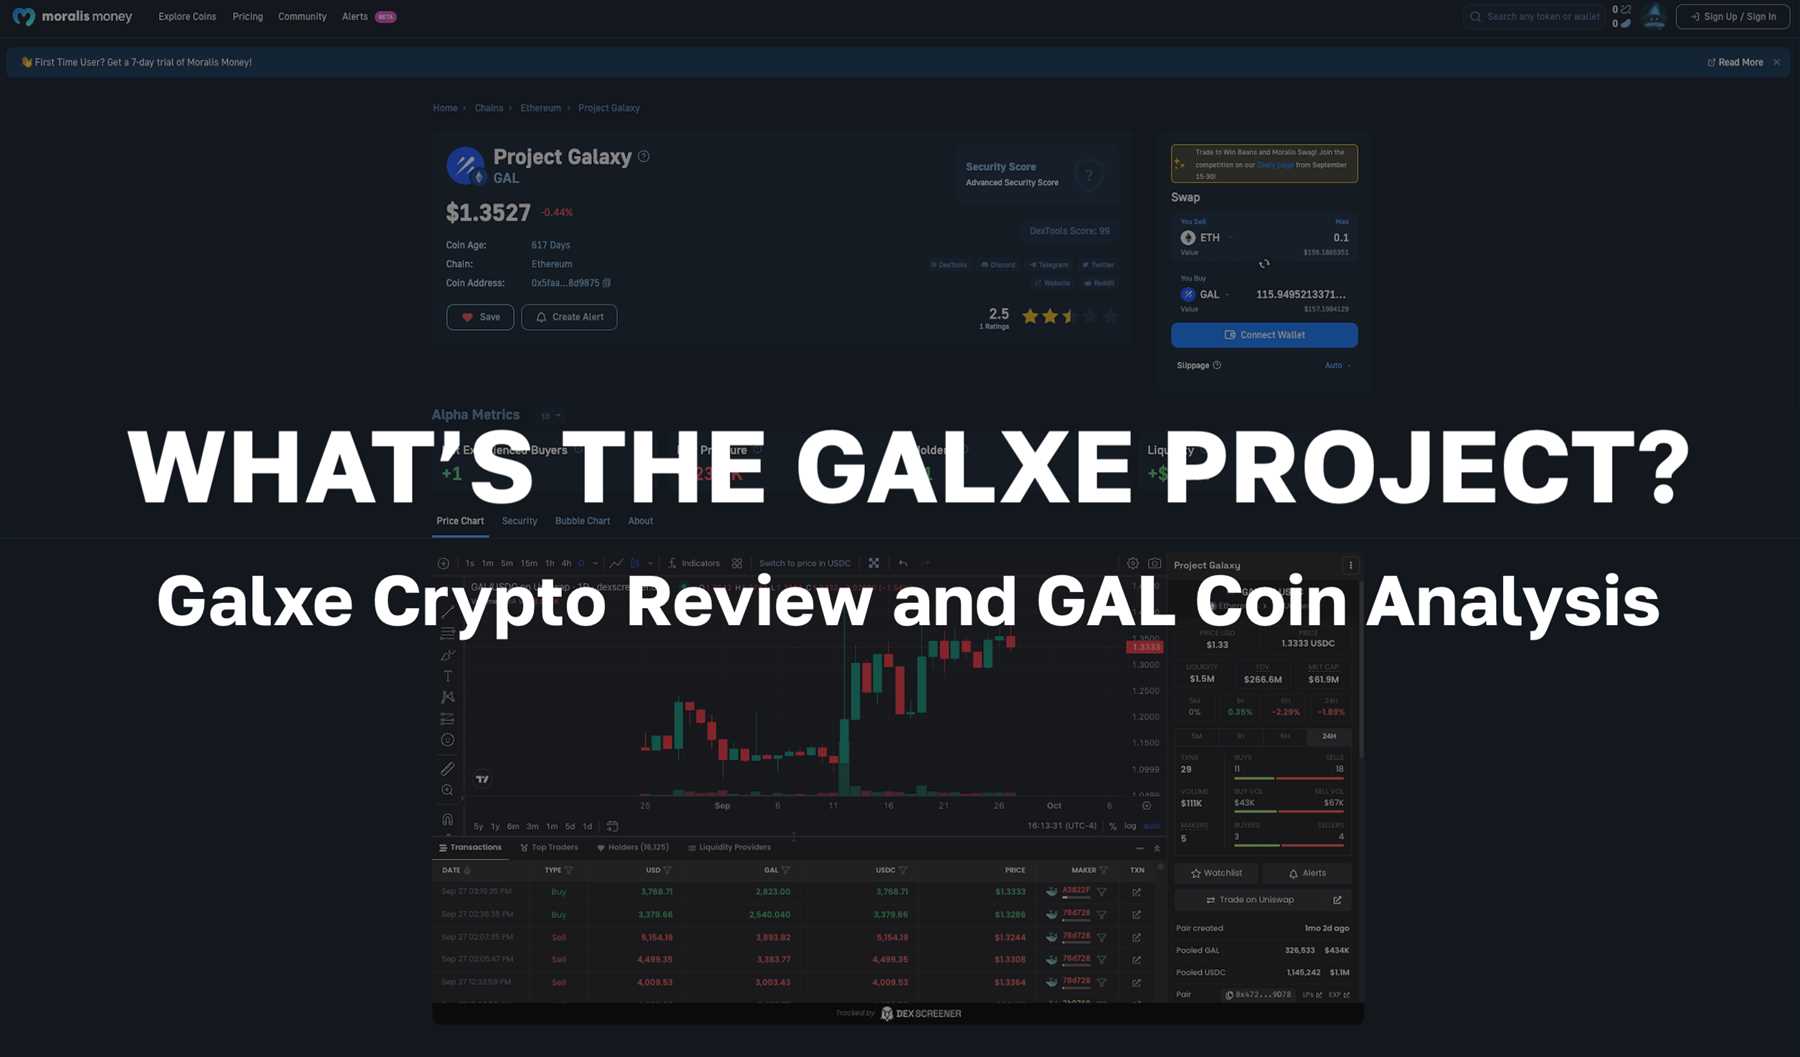 How Galxe is Changing the Game